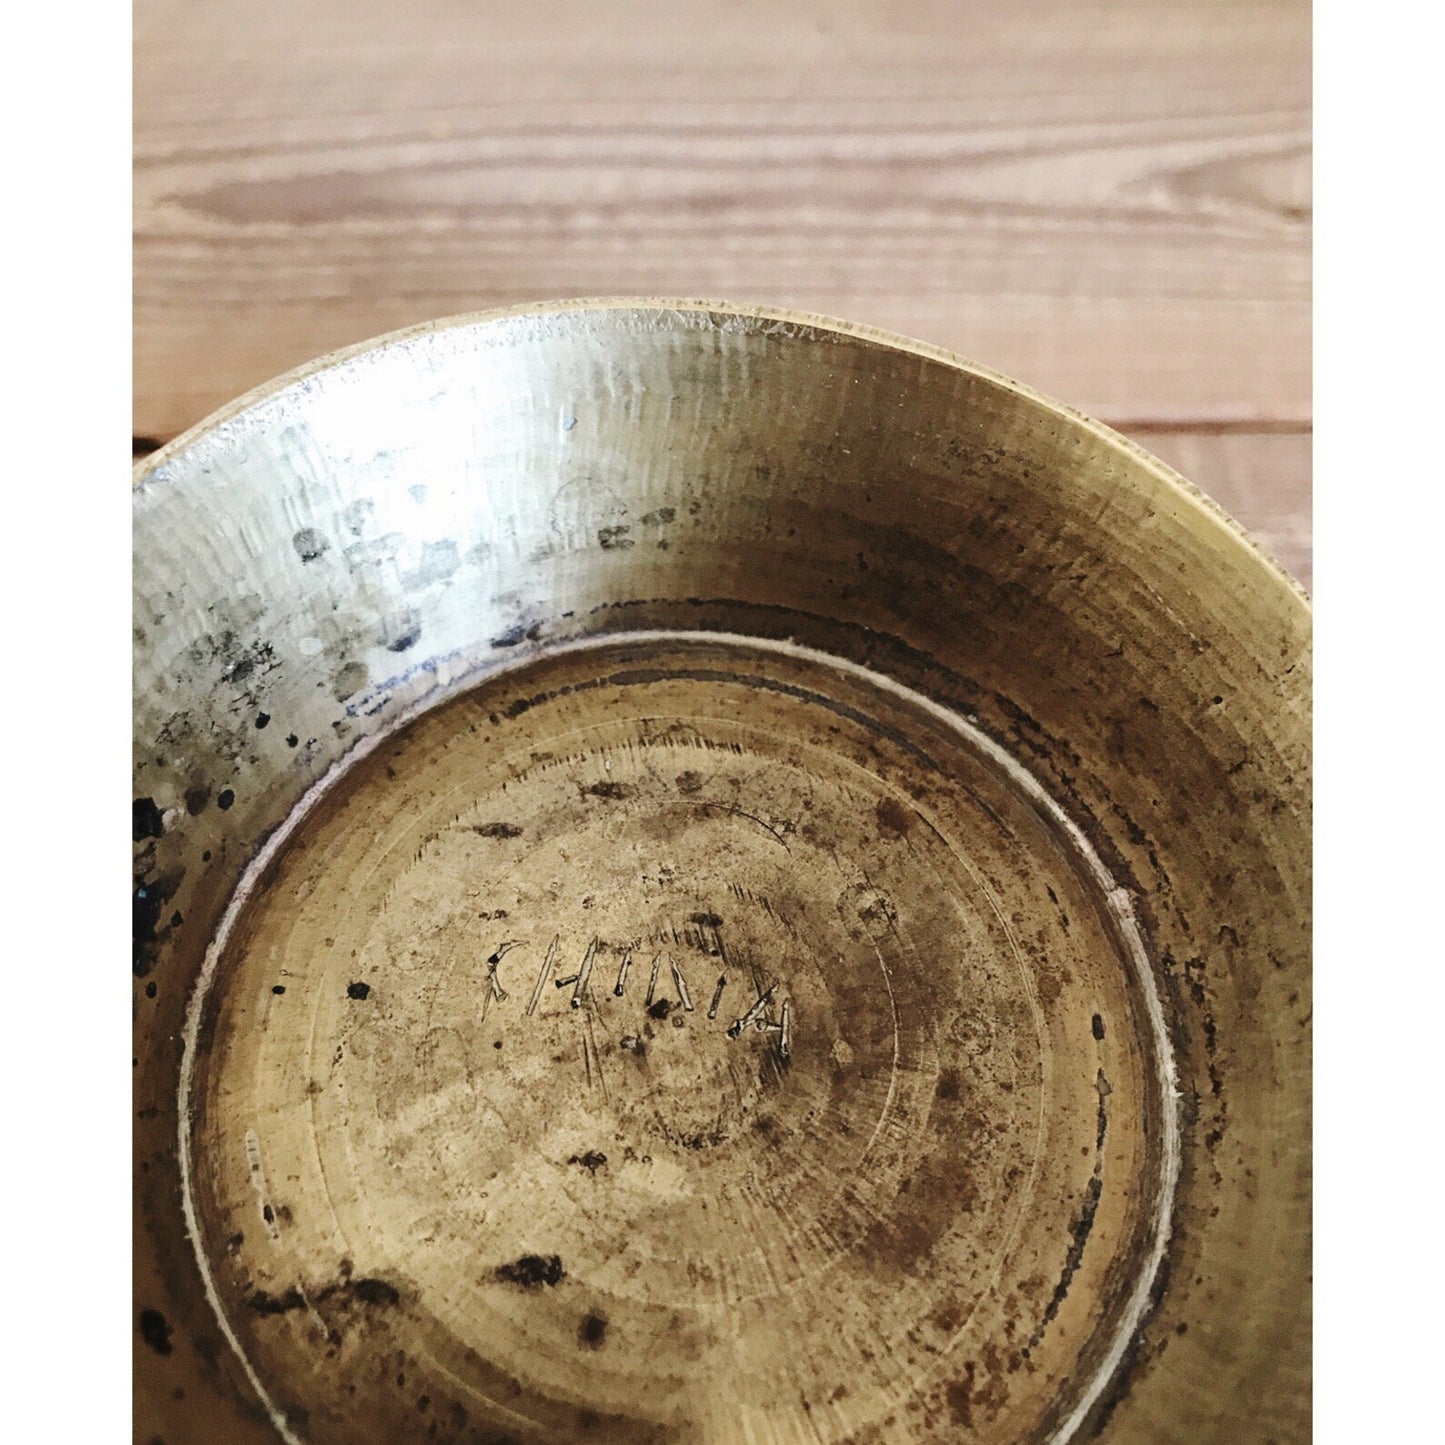 Etched Brass Footed Bowl / Decorative Brass Bowl